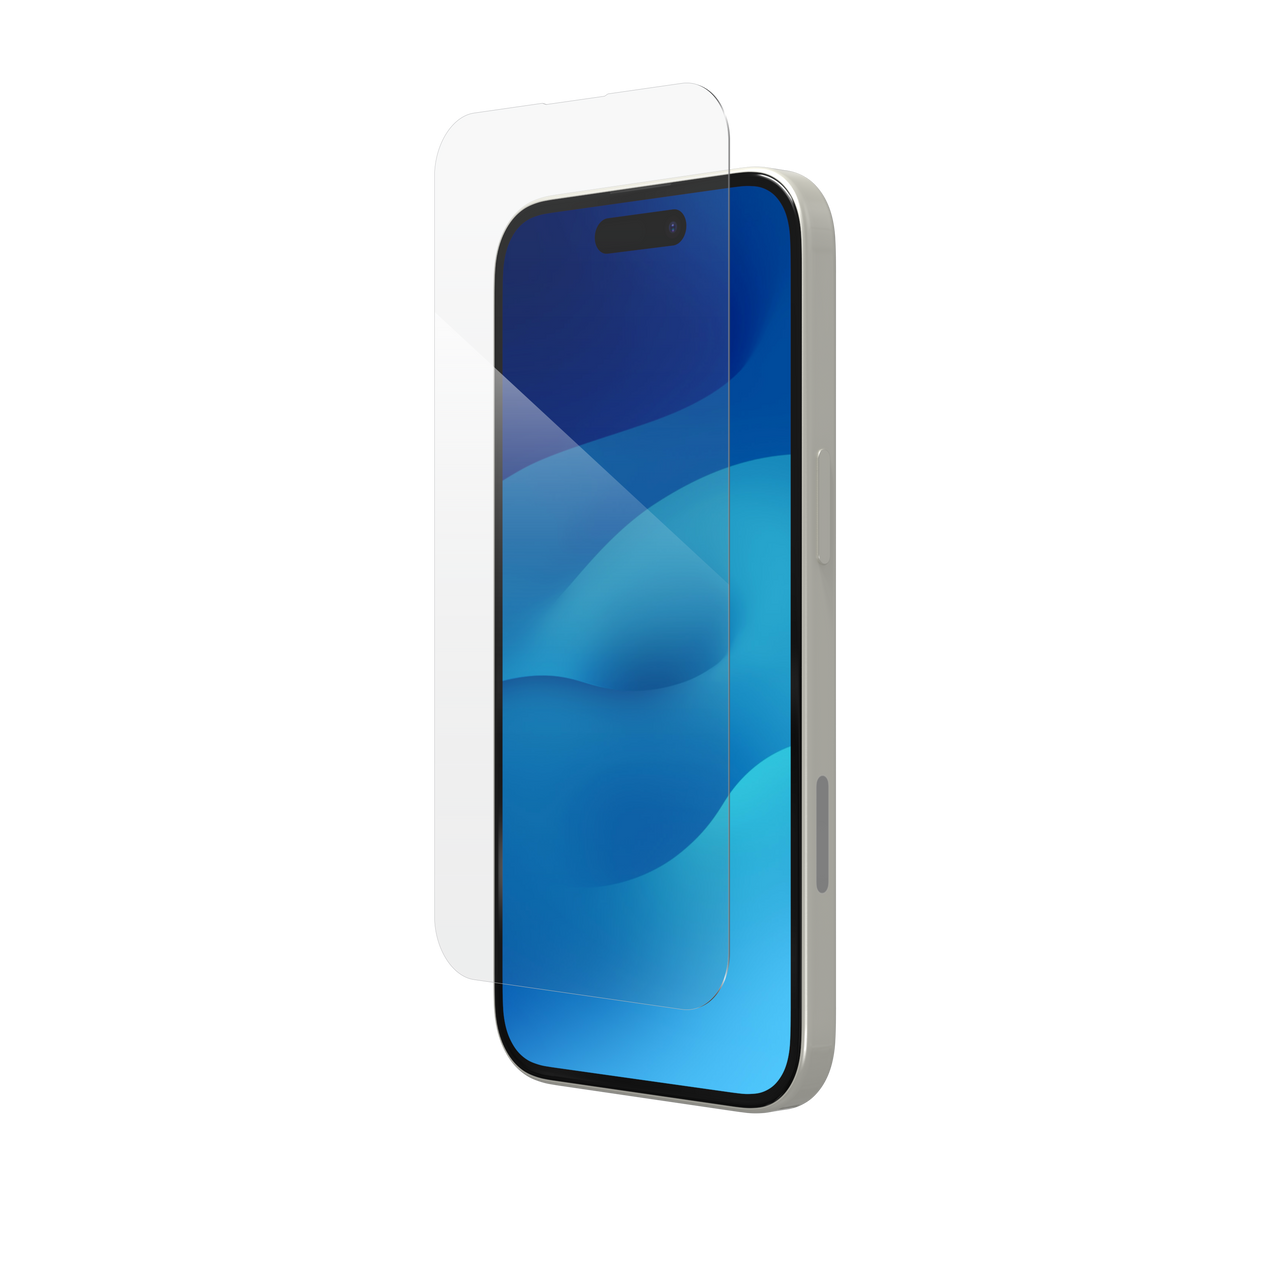 ZAGG InvisibleShield Glass XTR for iPhone 13 and 13 Pro, Heavy-Duty D30  Material, Ultra-Sensitive & Smooth Touch, Blue-Light Protection,  Anti-Microbial Treatment, Easy to Install 